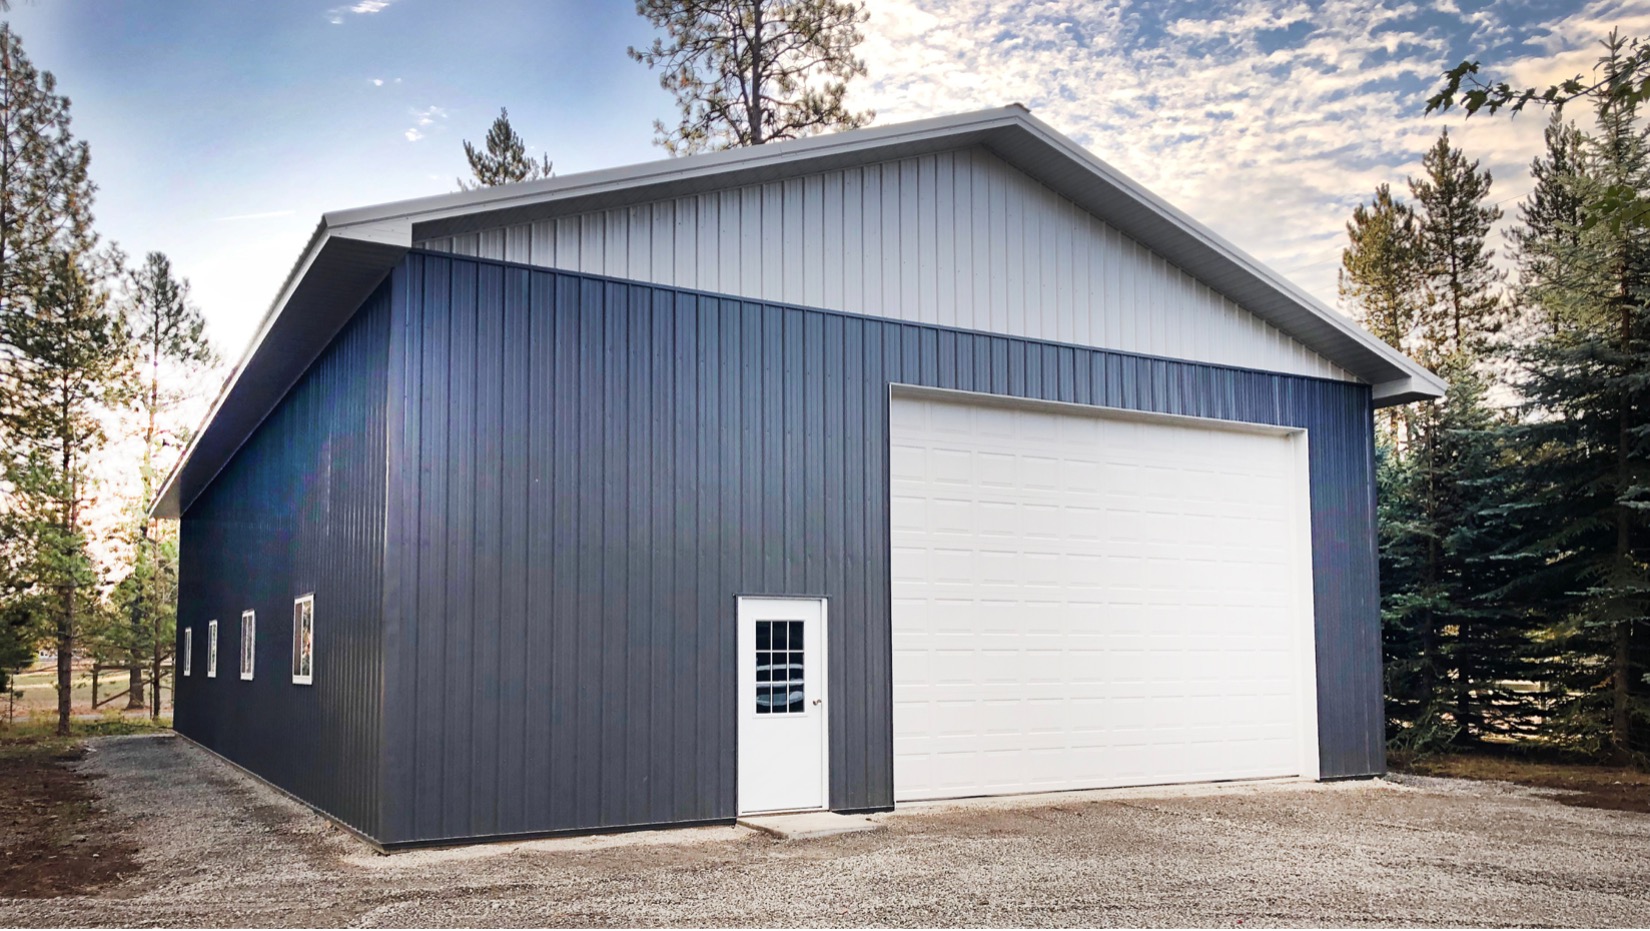 7 Design Ideas for Your New Garage in Chewelah